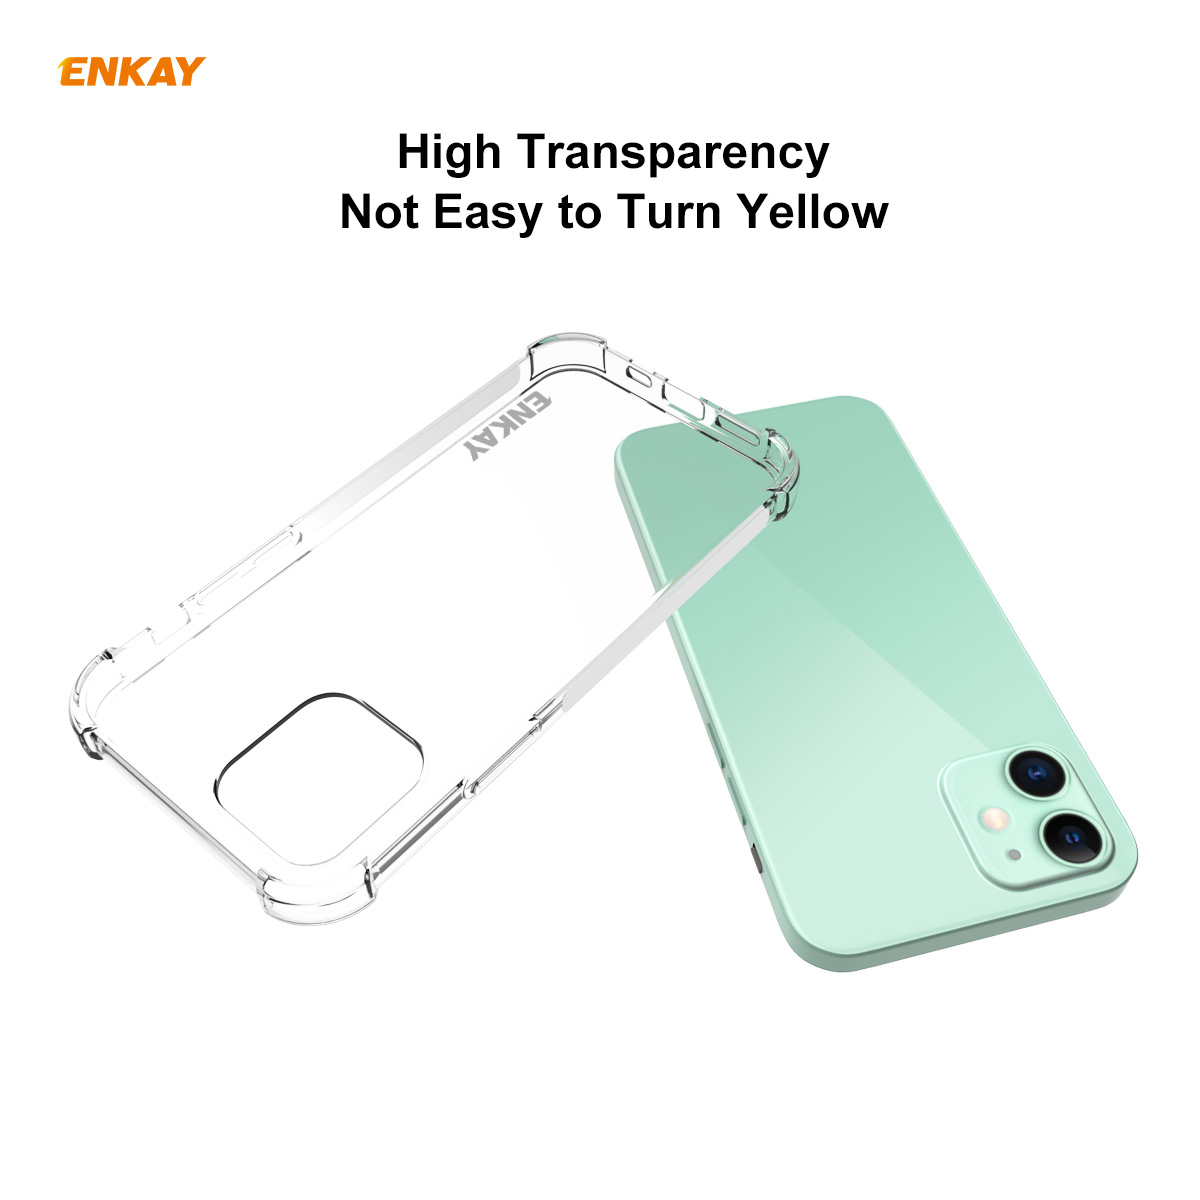 Enkay-2-in-1-for-iPhone-12-Mini-Accessories-with-Airbags-Non-Yellow-Transparent-TPU-Protective-Case--1770213-6